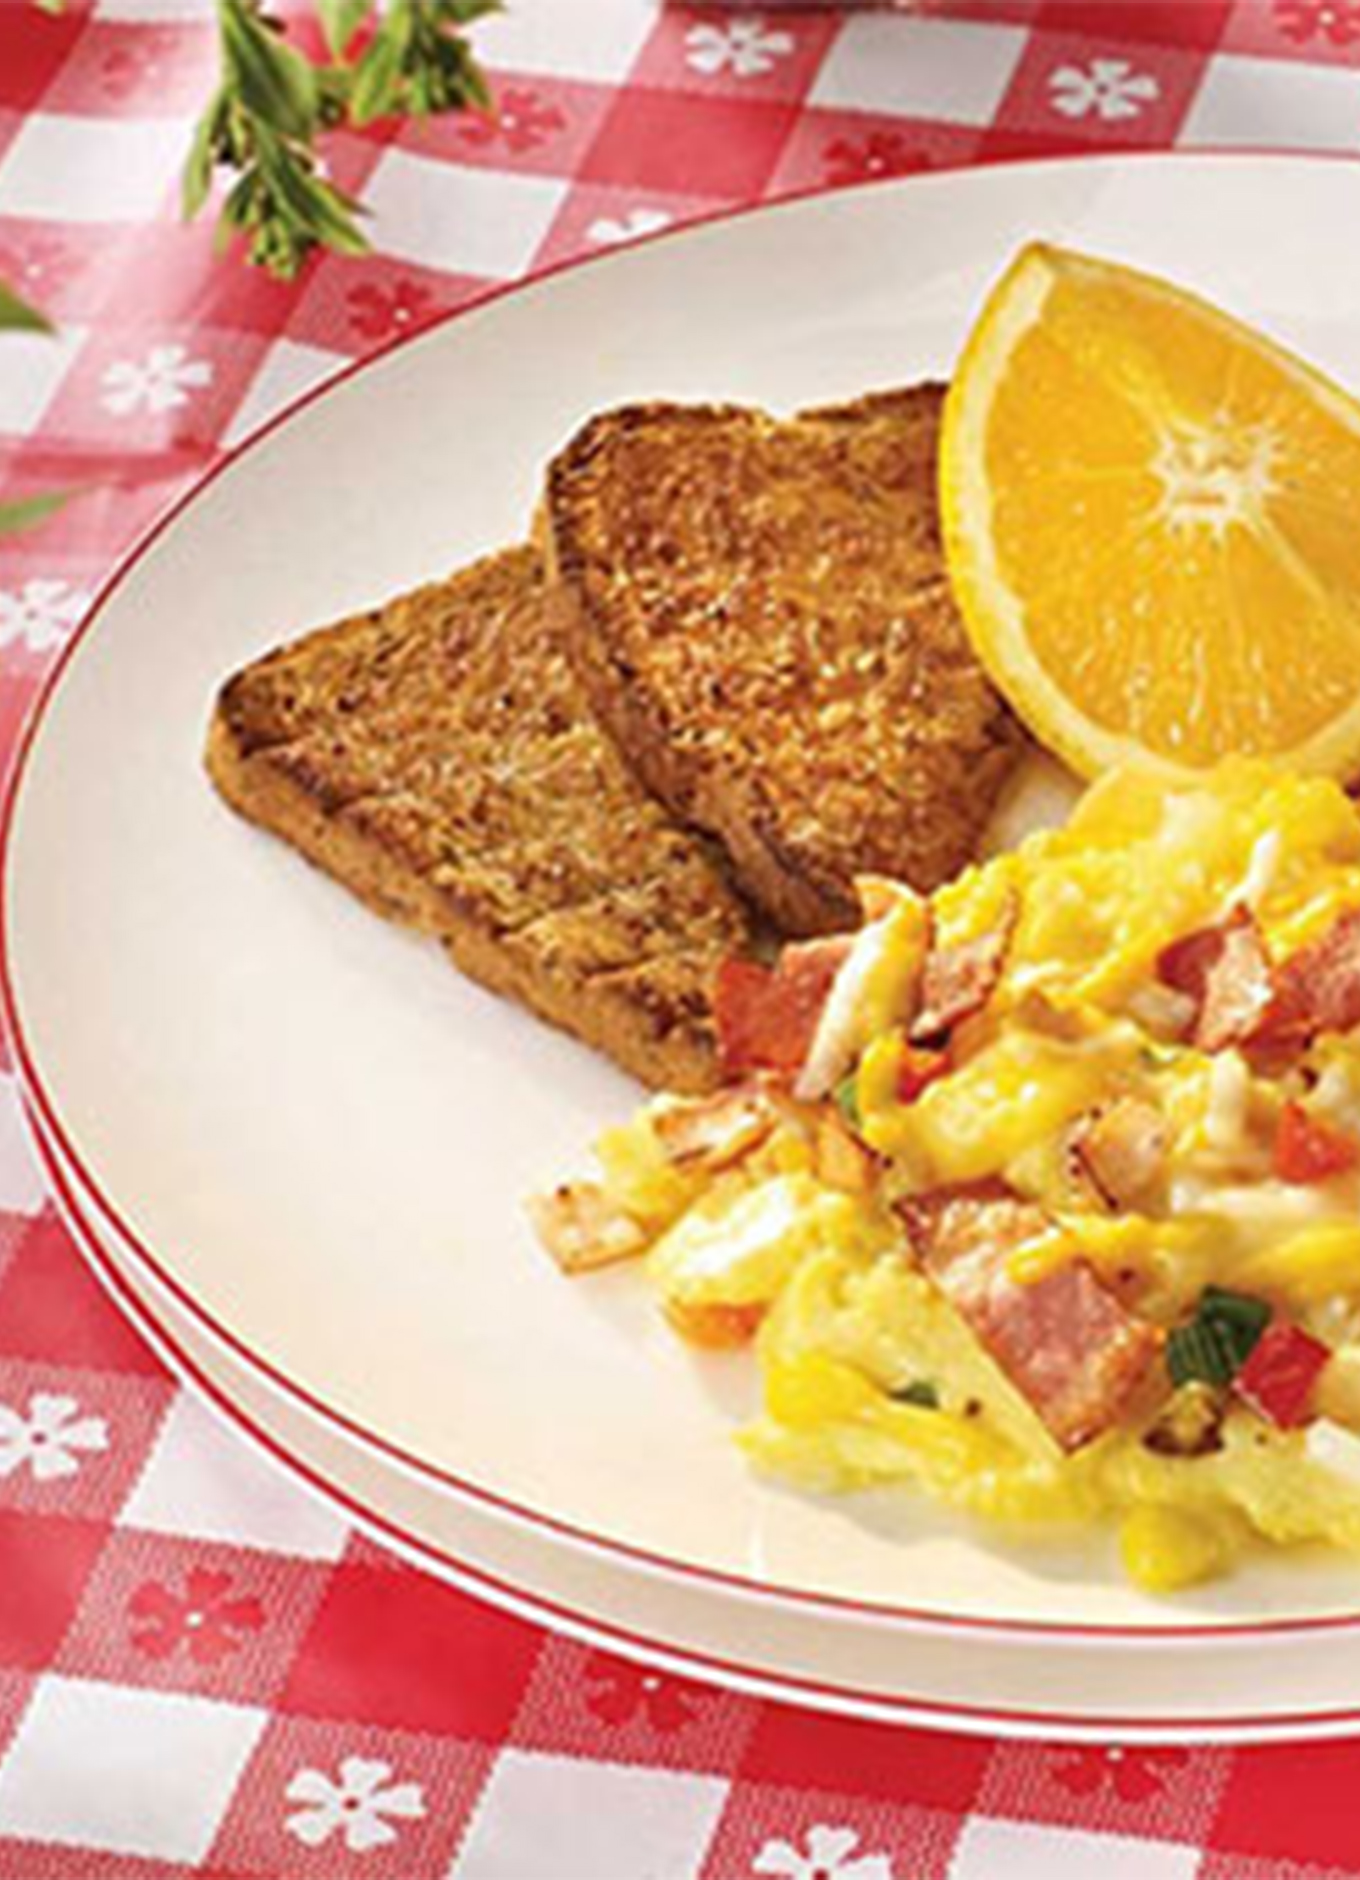 A breakfast platter with toast, fresh fruit, and scrambled eggs made with peppers and Breakfast Chicken Strips